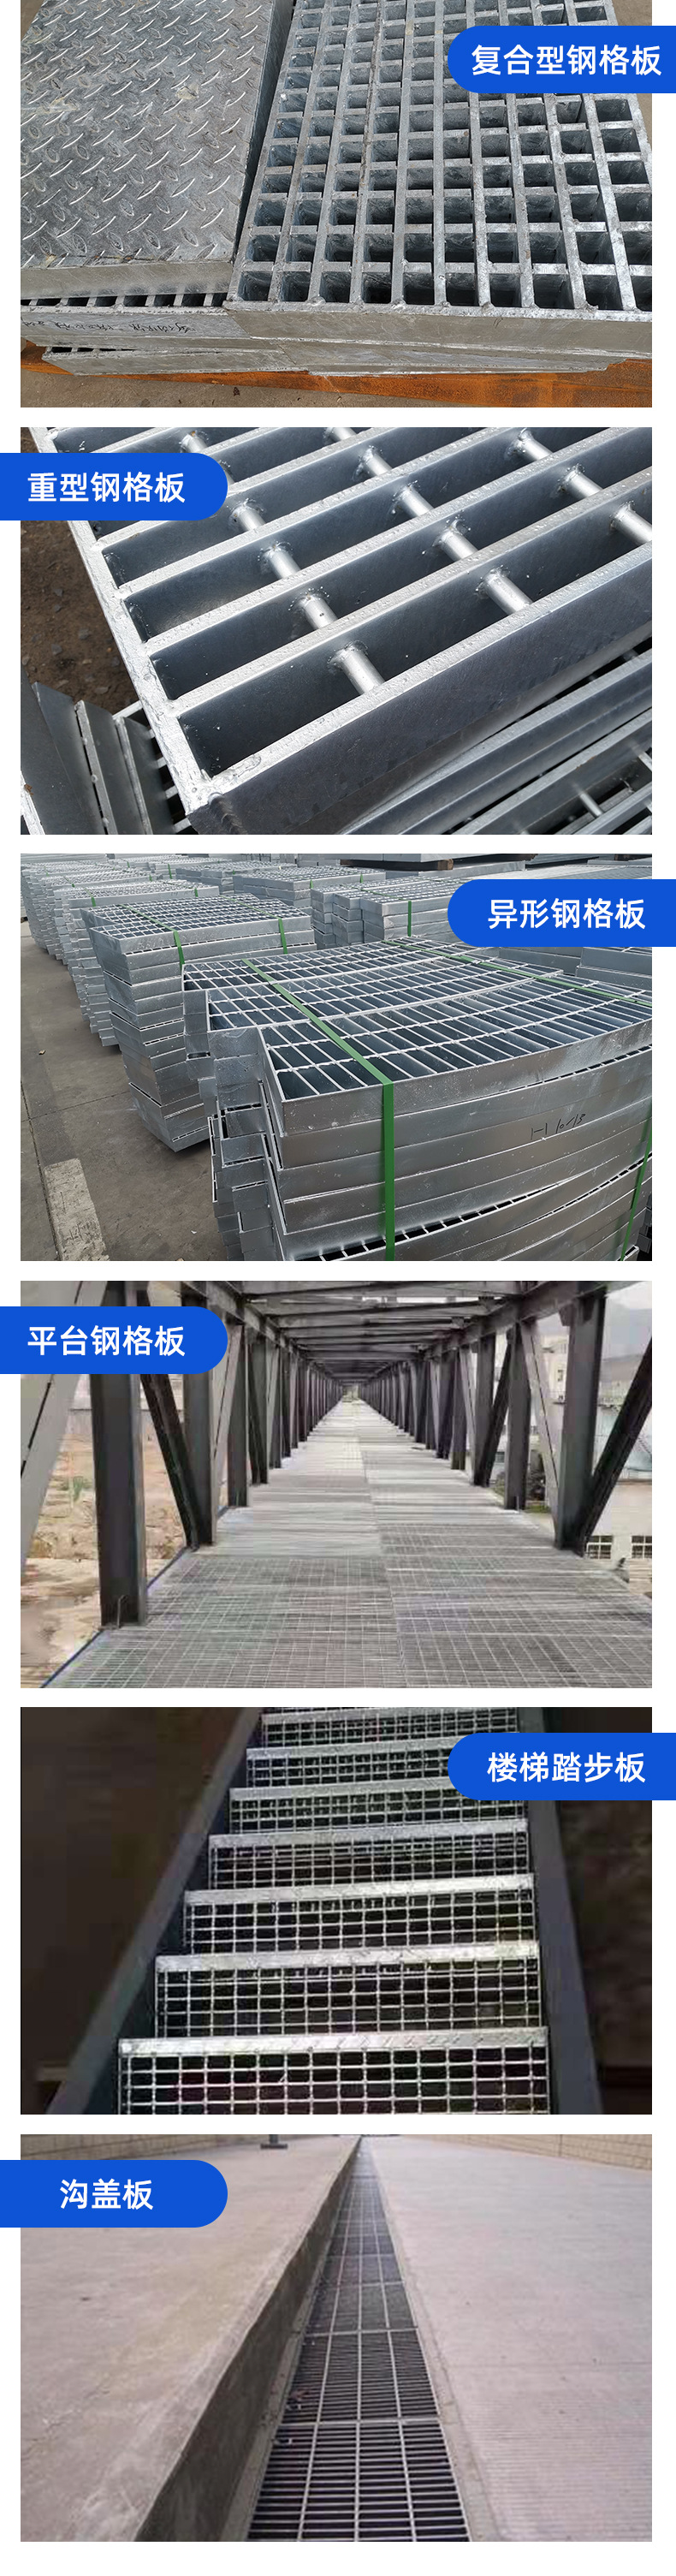 Galvanized steel grating for power plant construction, chemical engineering, rectangular solid business